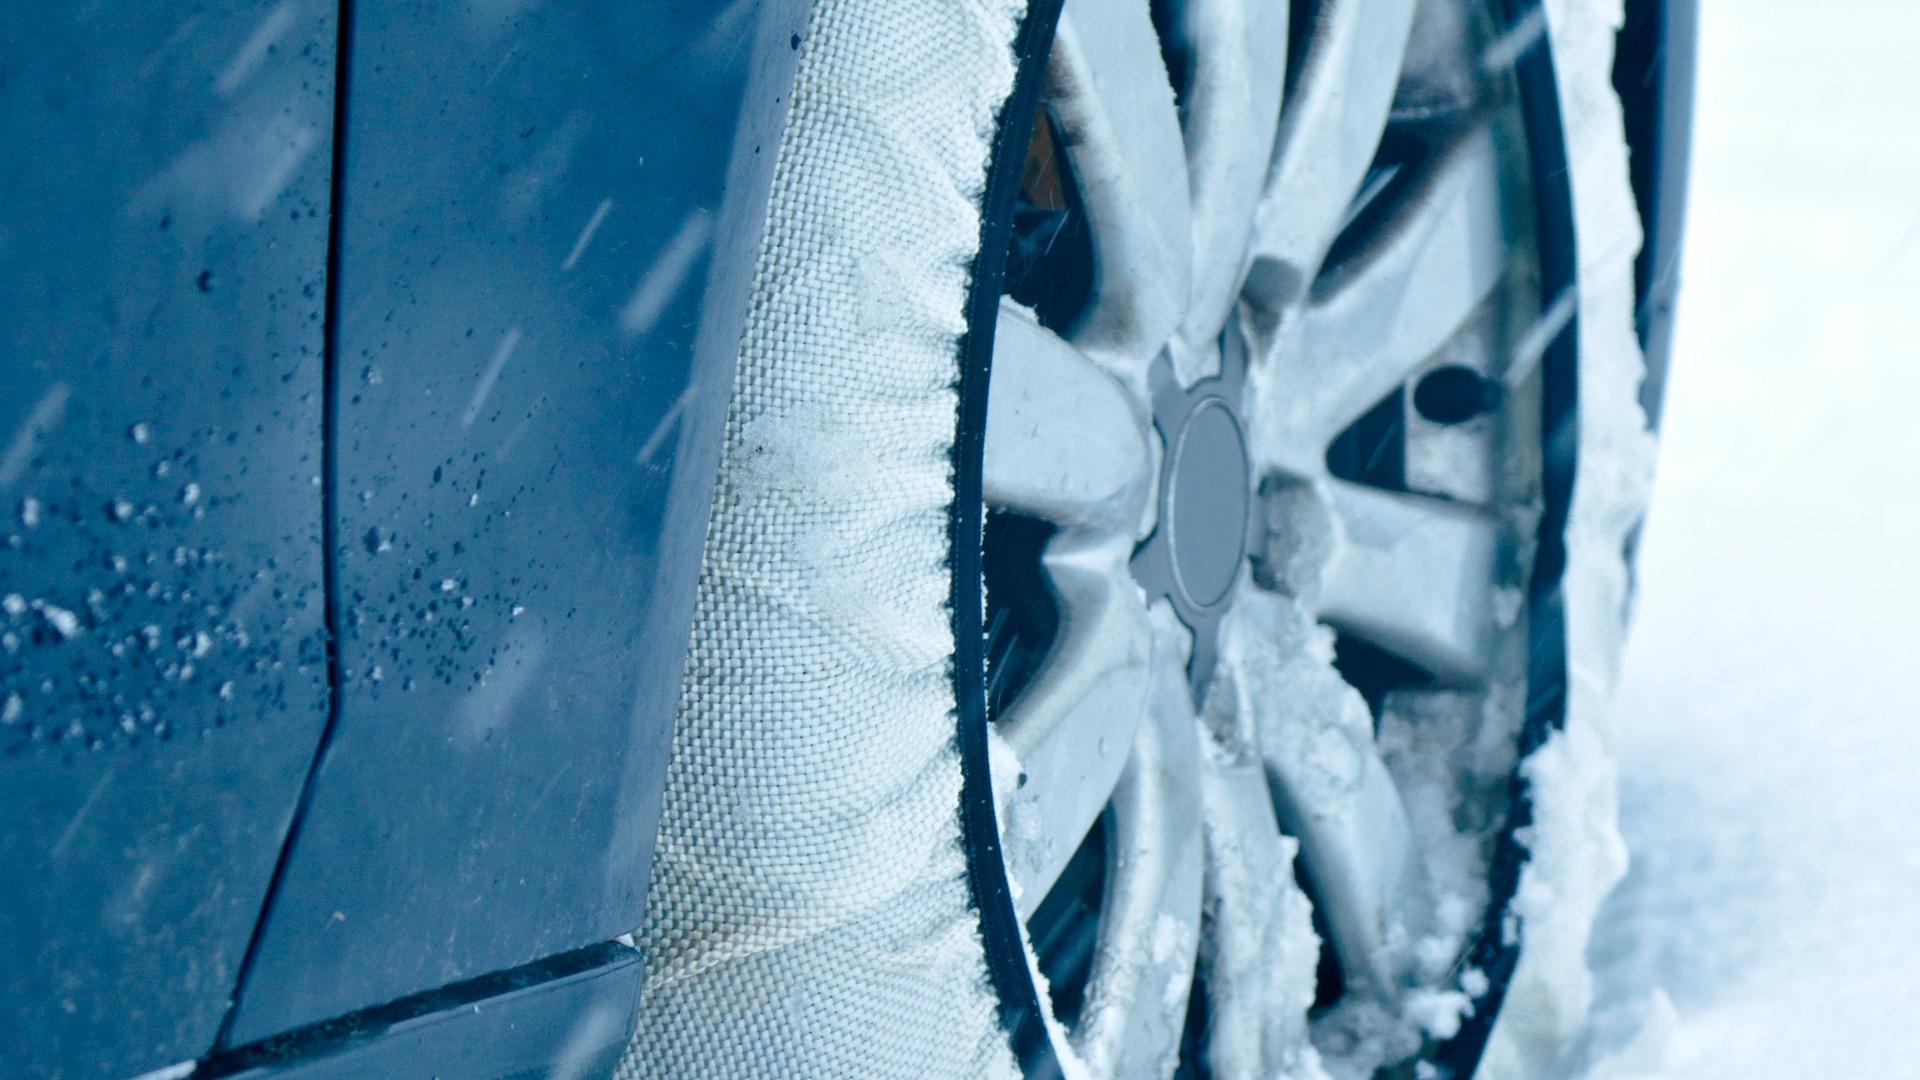 A fabric snow sock vs chains on a tire in snow